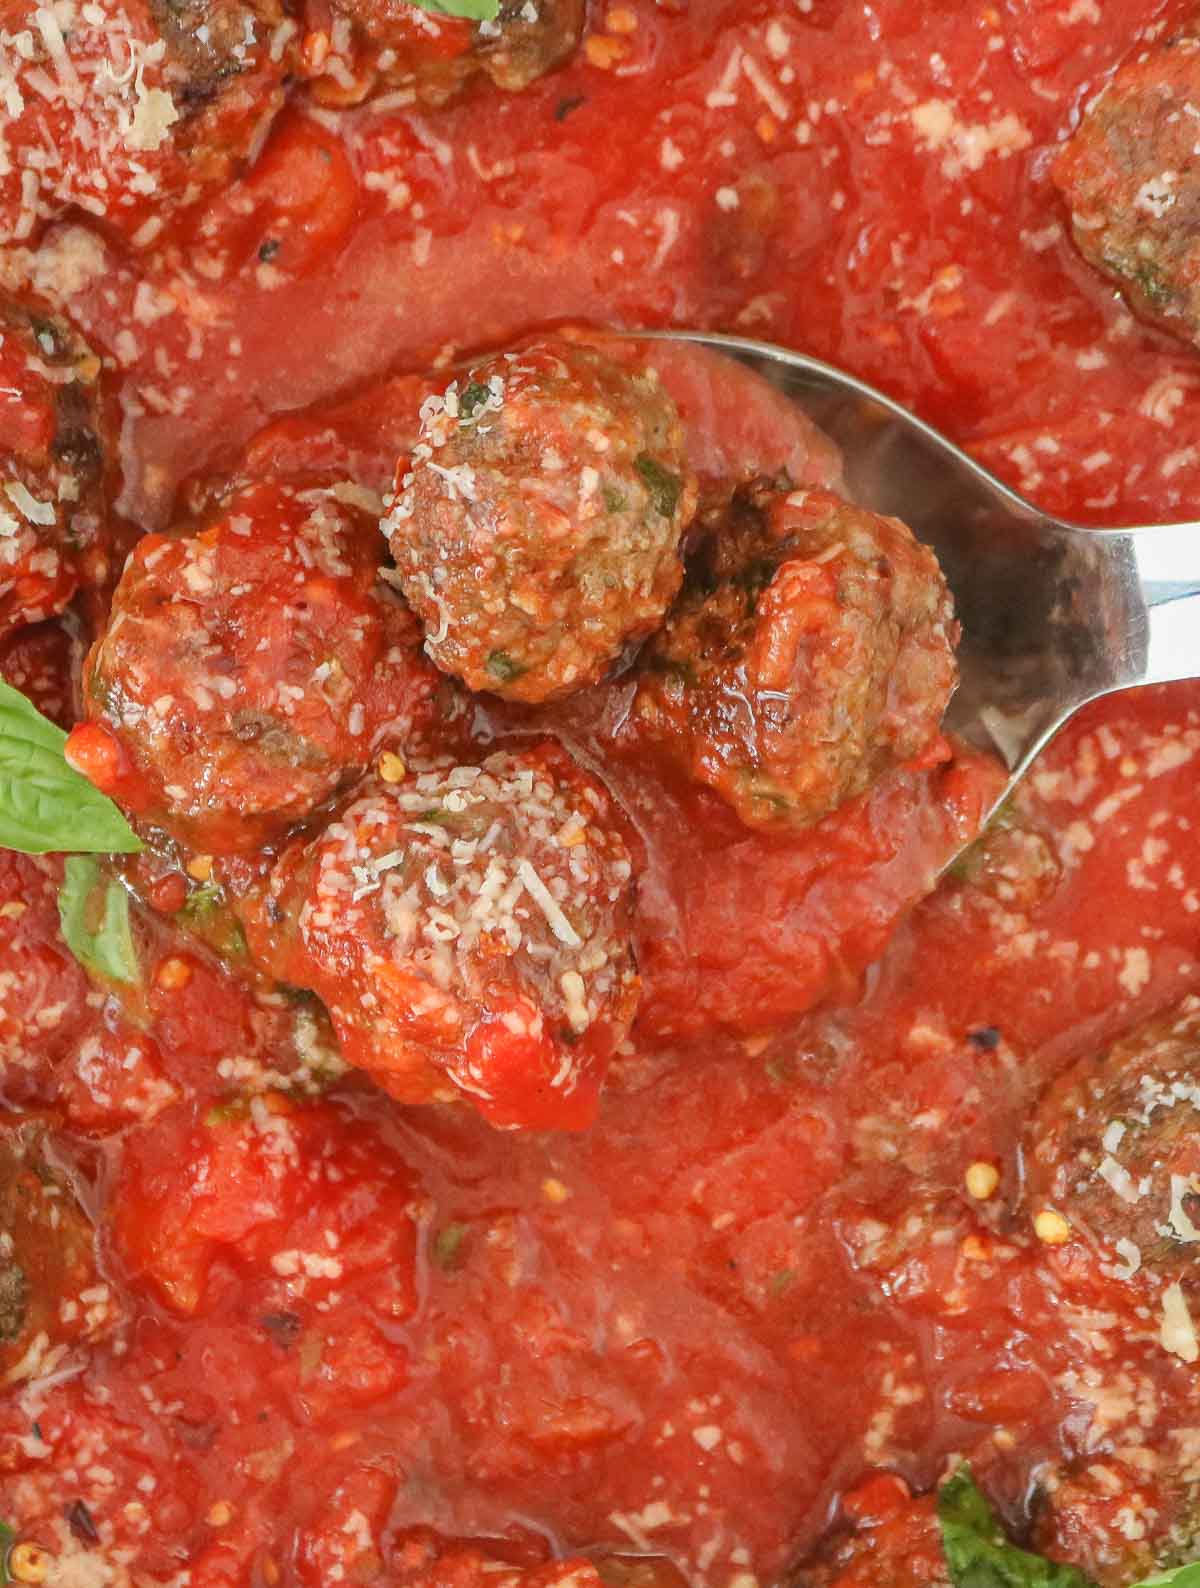 Serving spoon of four baked meatballs with sauce from a pan of meatballs.